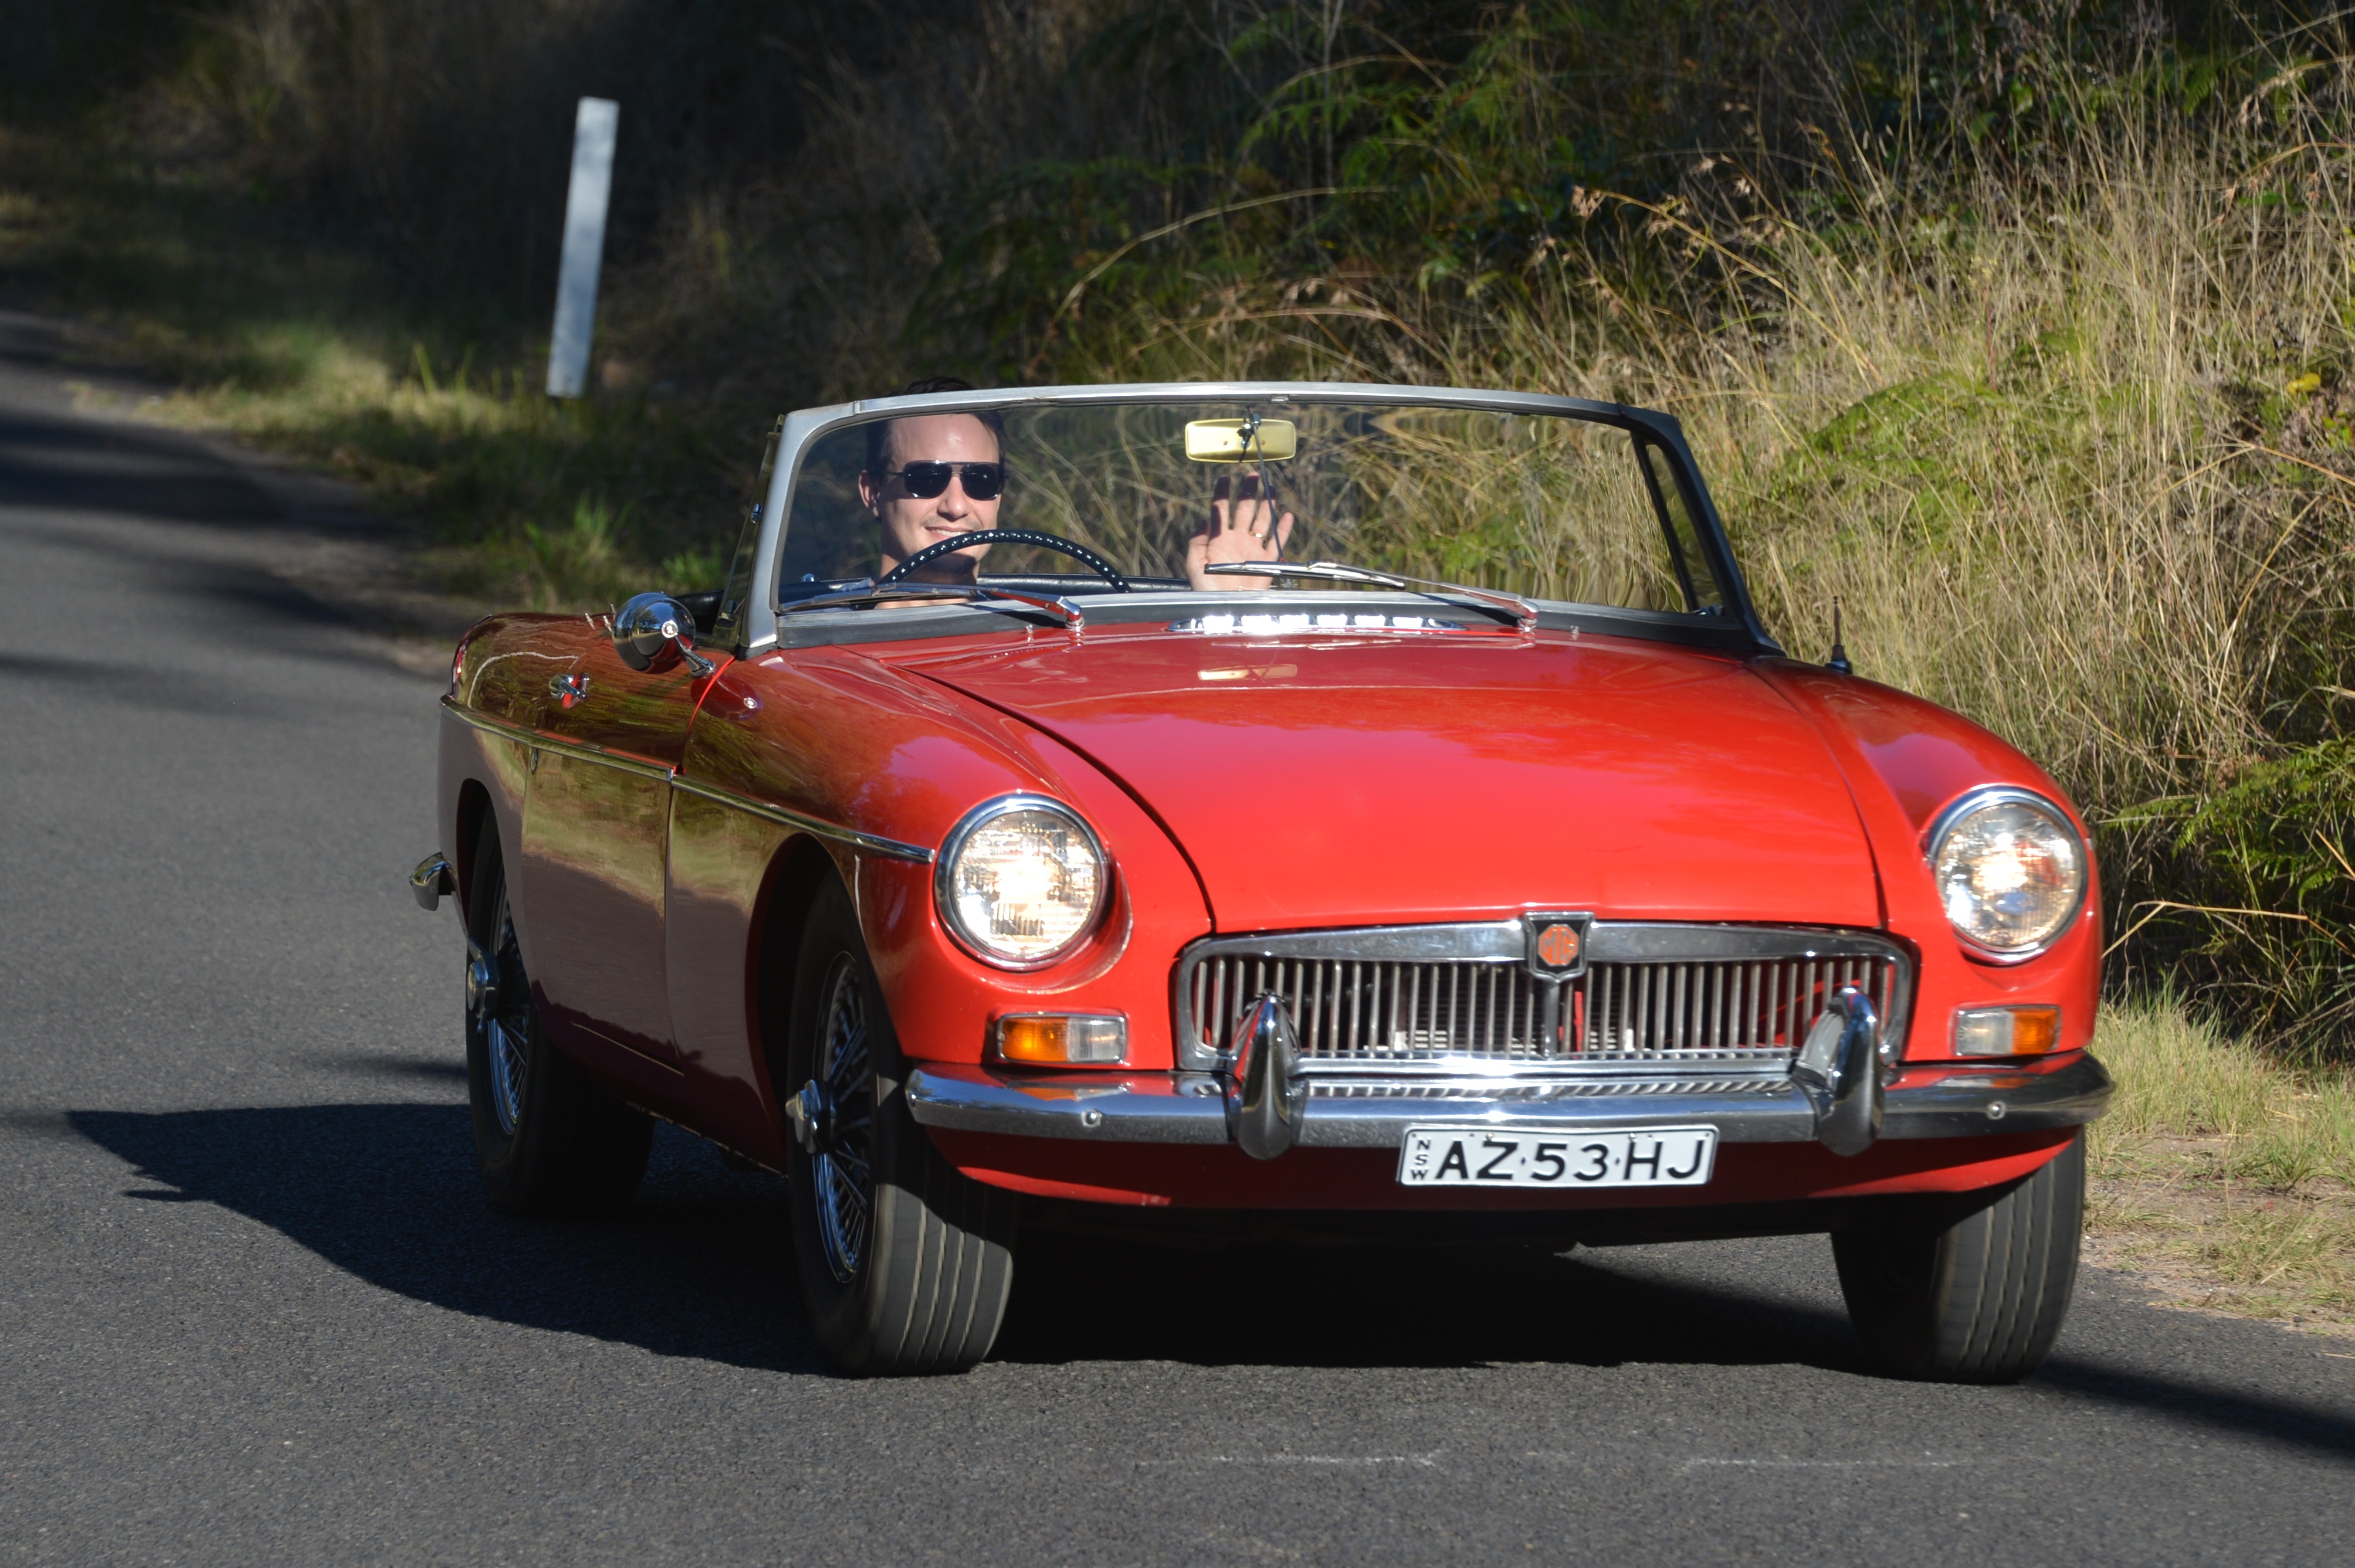 “Bertie” – 1964 MGB. From $290 per day.